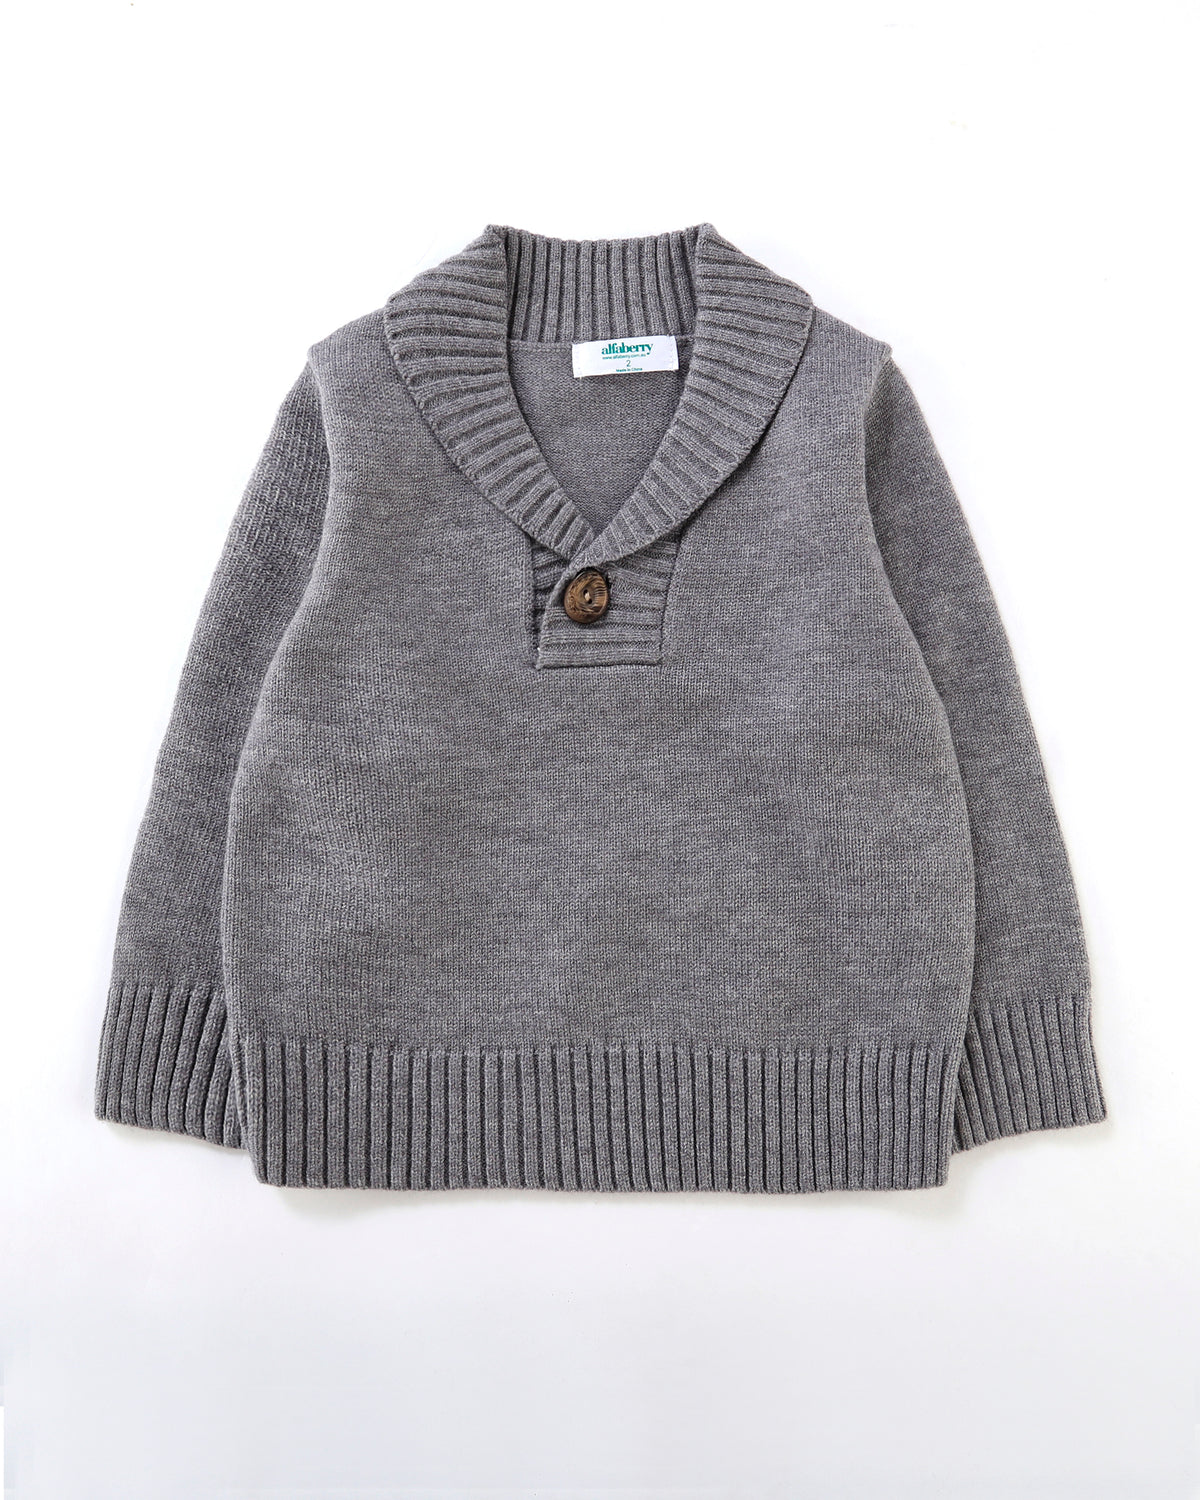 Good Times Collared Jumper in Grey Front